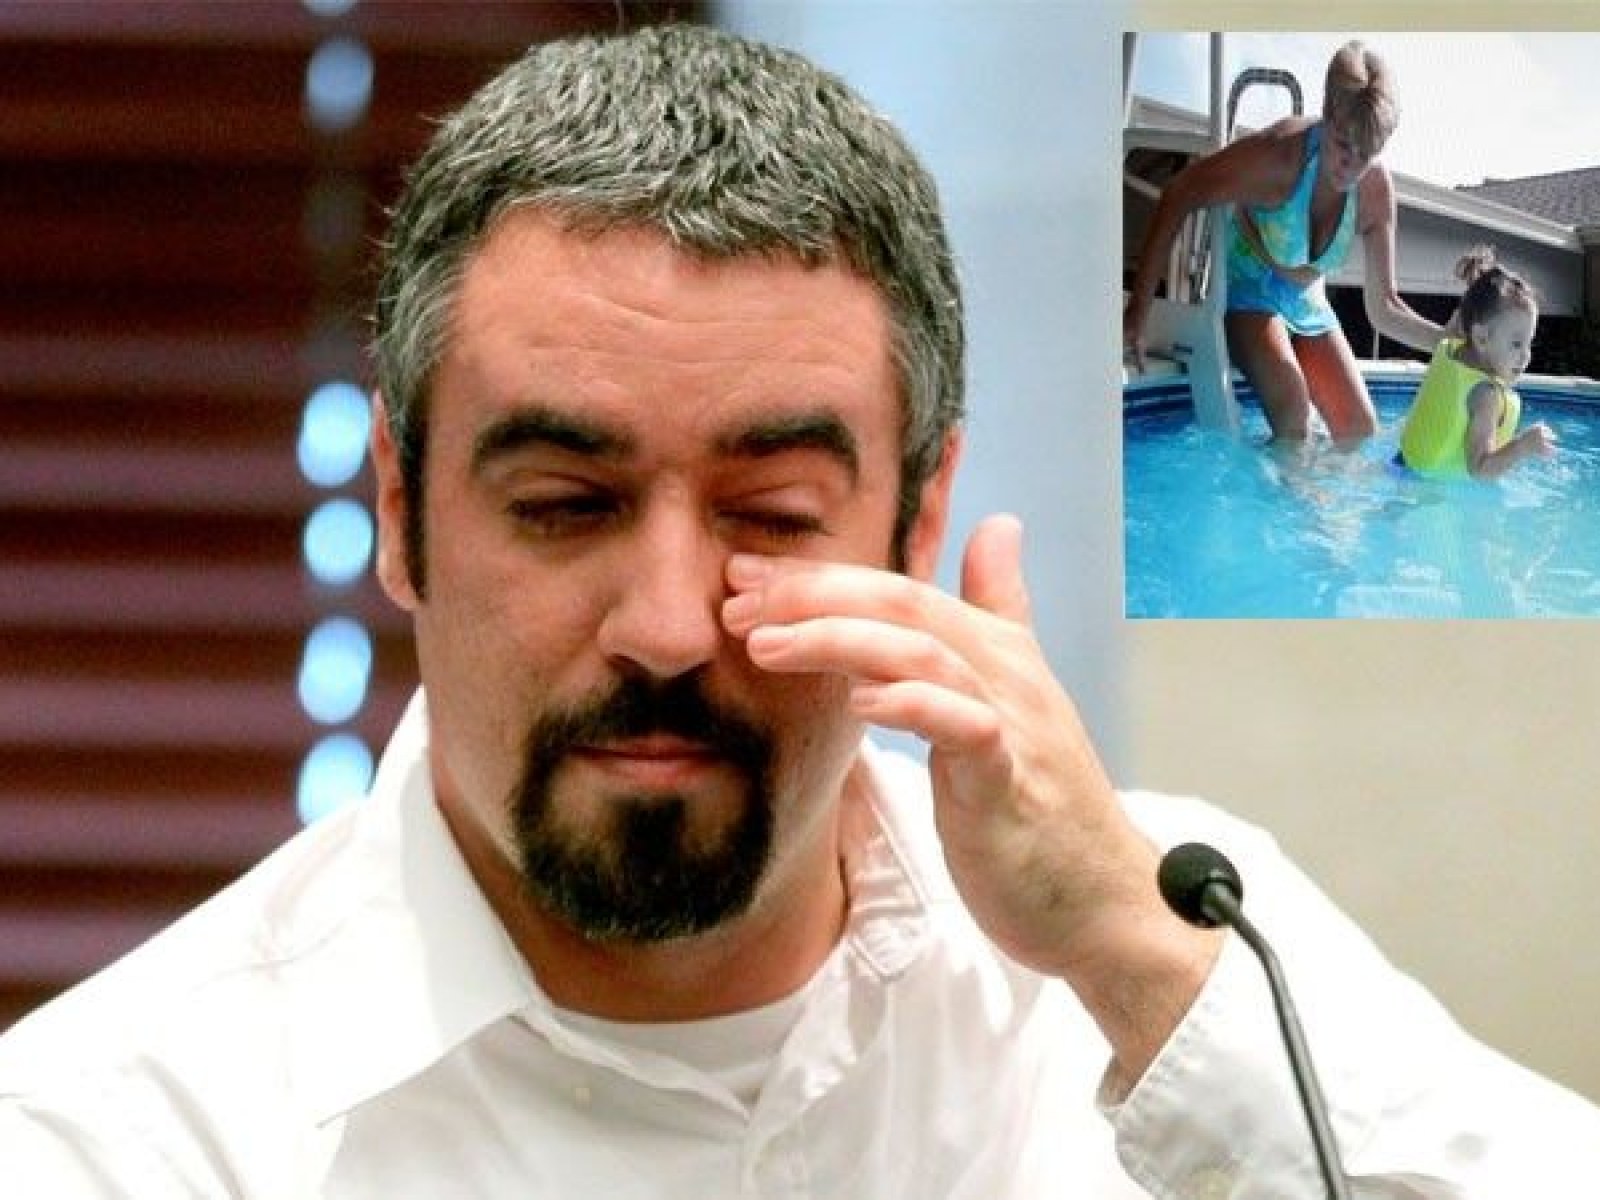 Casey Anthony Trial Day 27: Casey's pregnancy, swimming pool and  dysfunctional Anthony family in focus